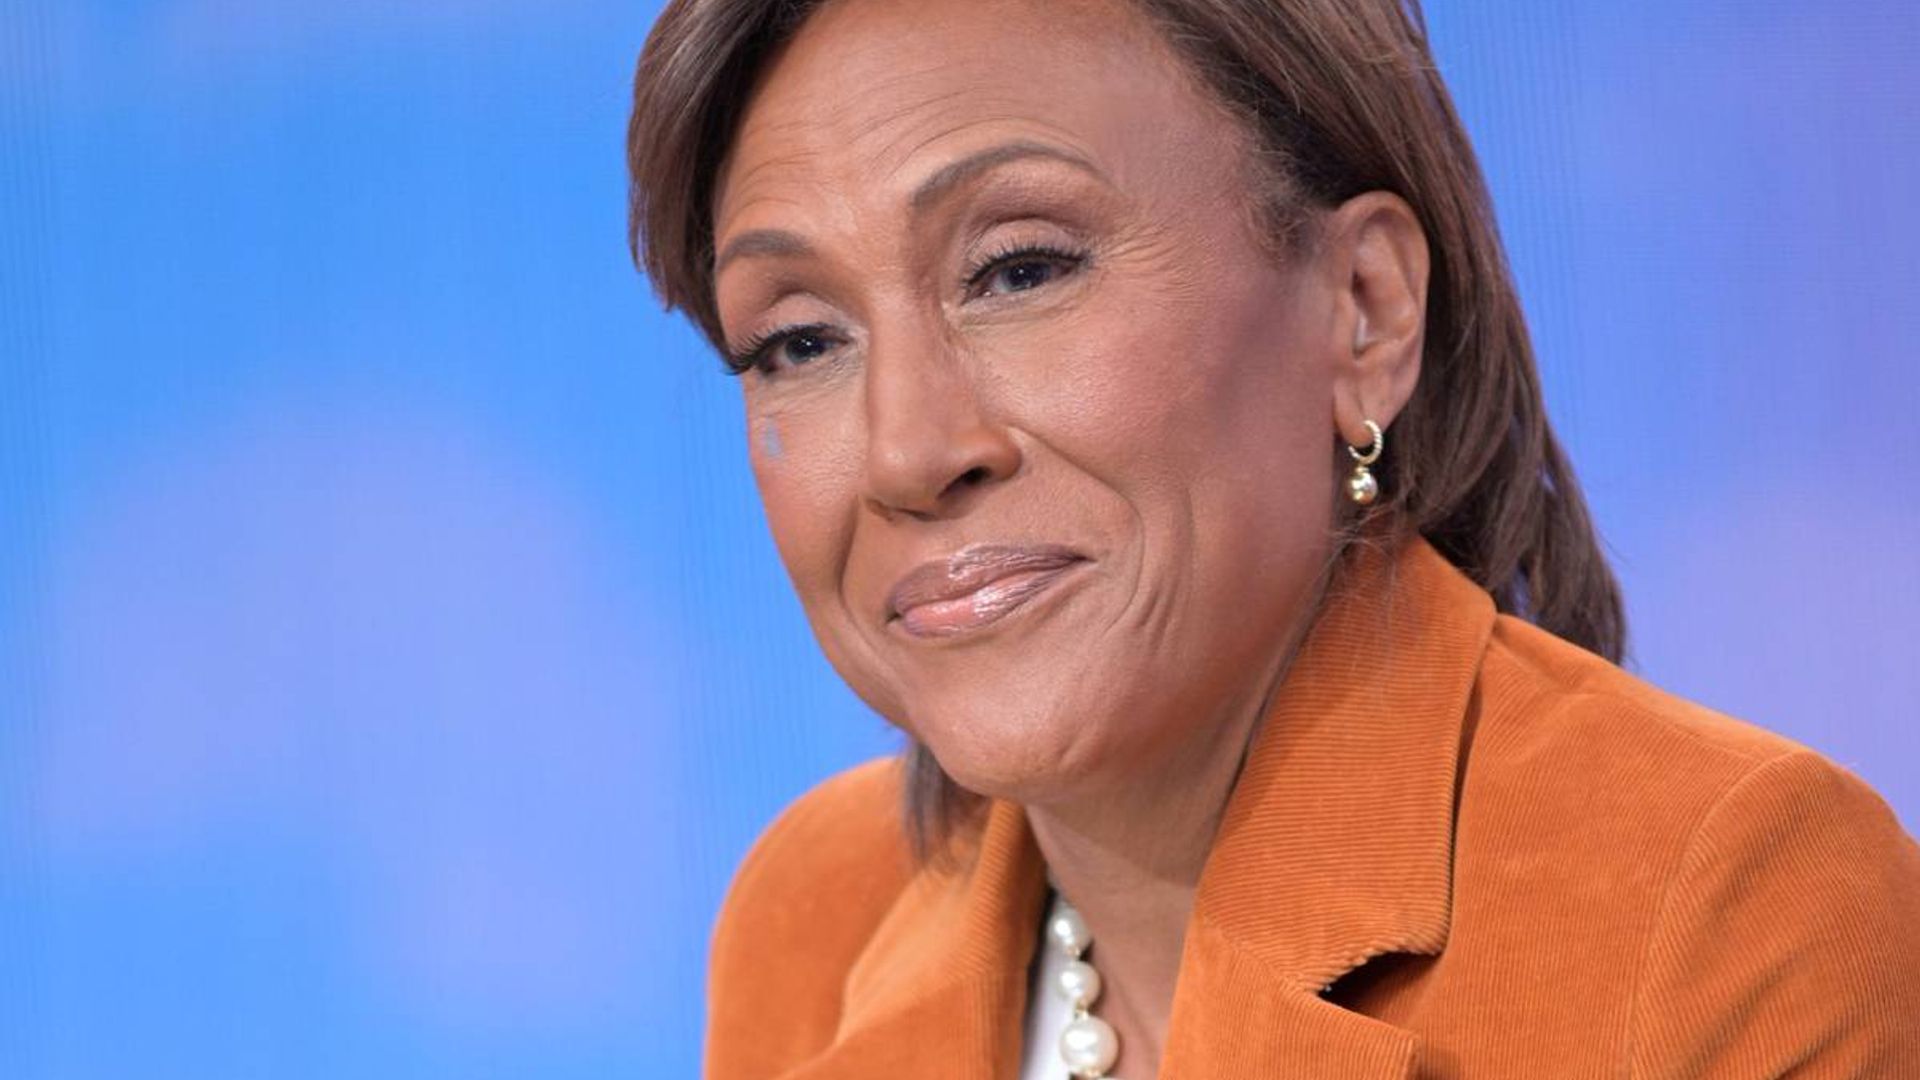 Robin Roberts receives heartwarming welcome after challenging start to day